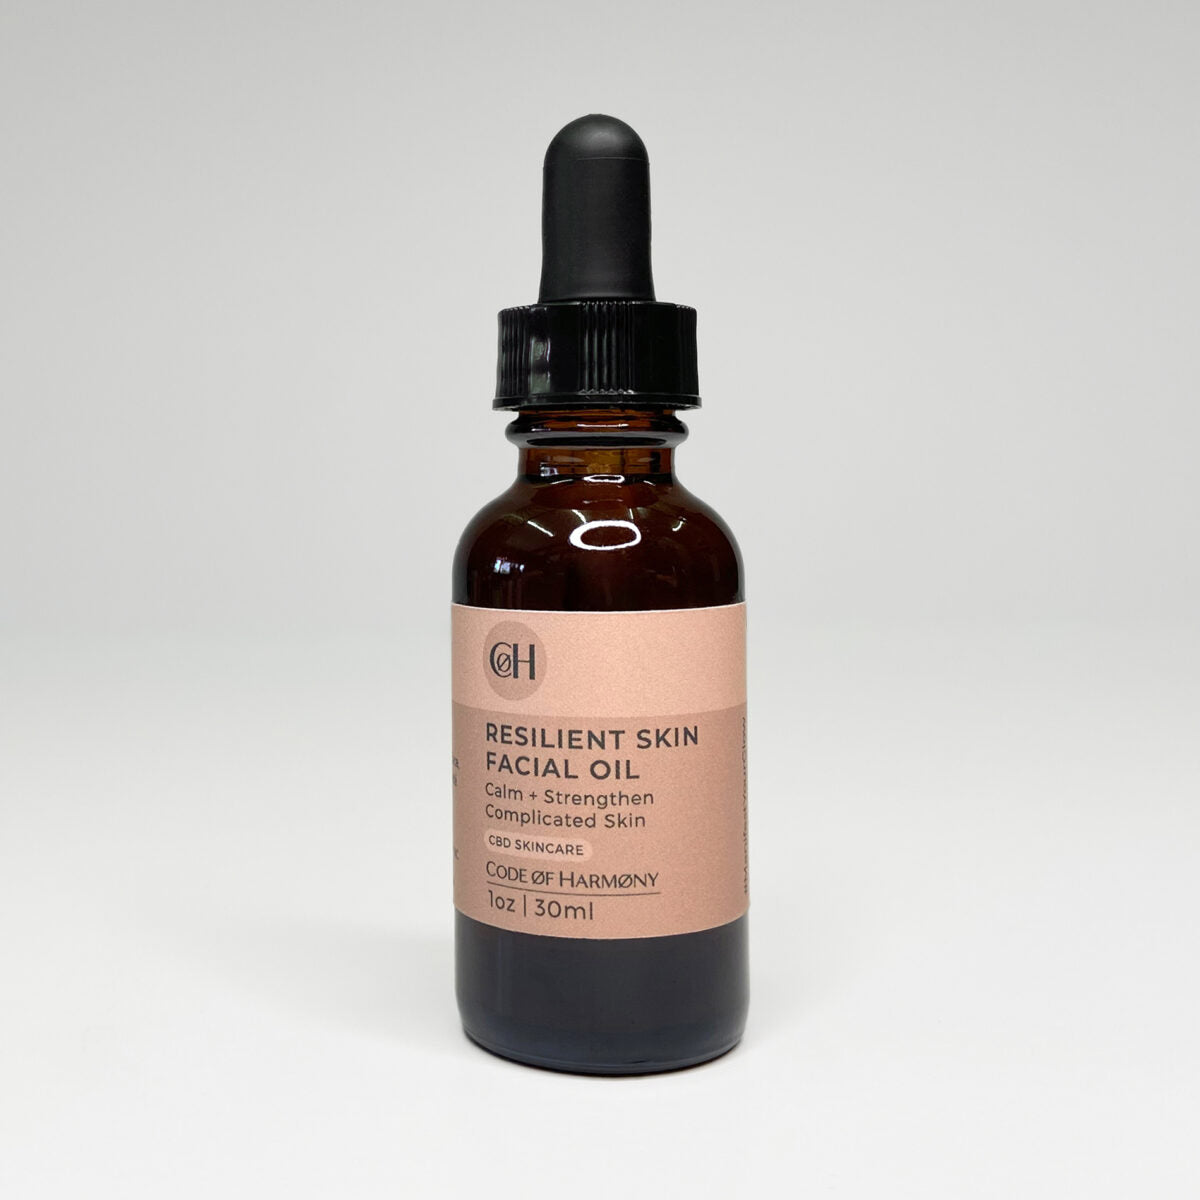 Resilient Skin Facial Oil